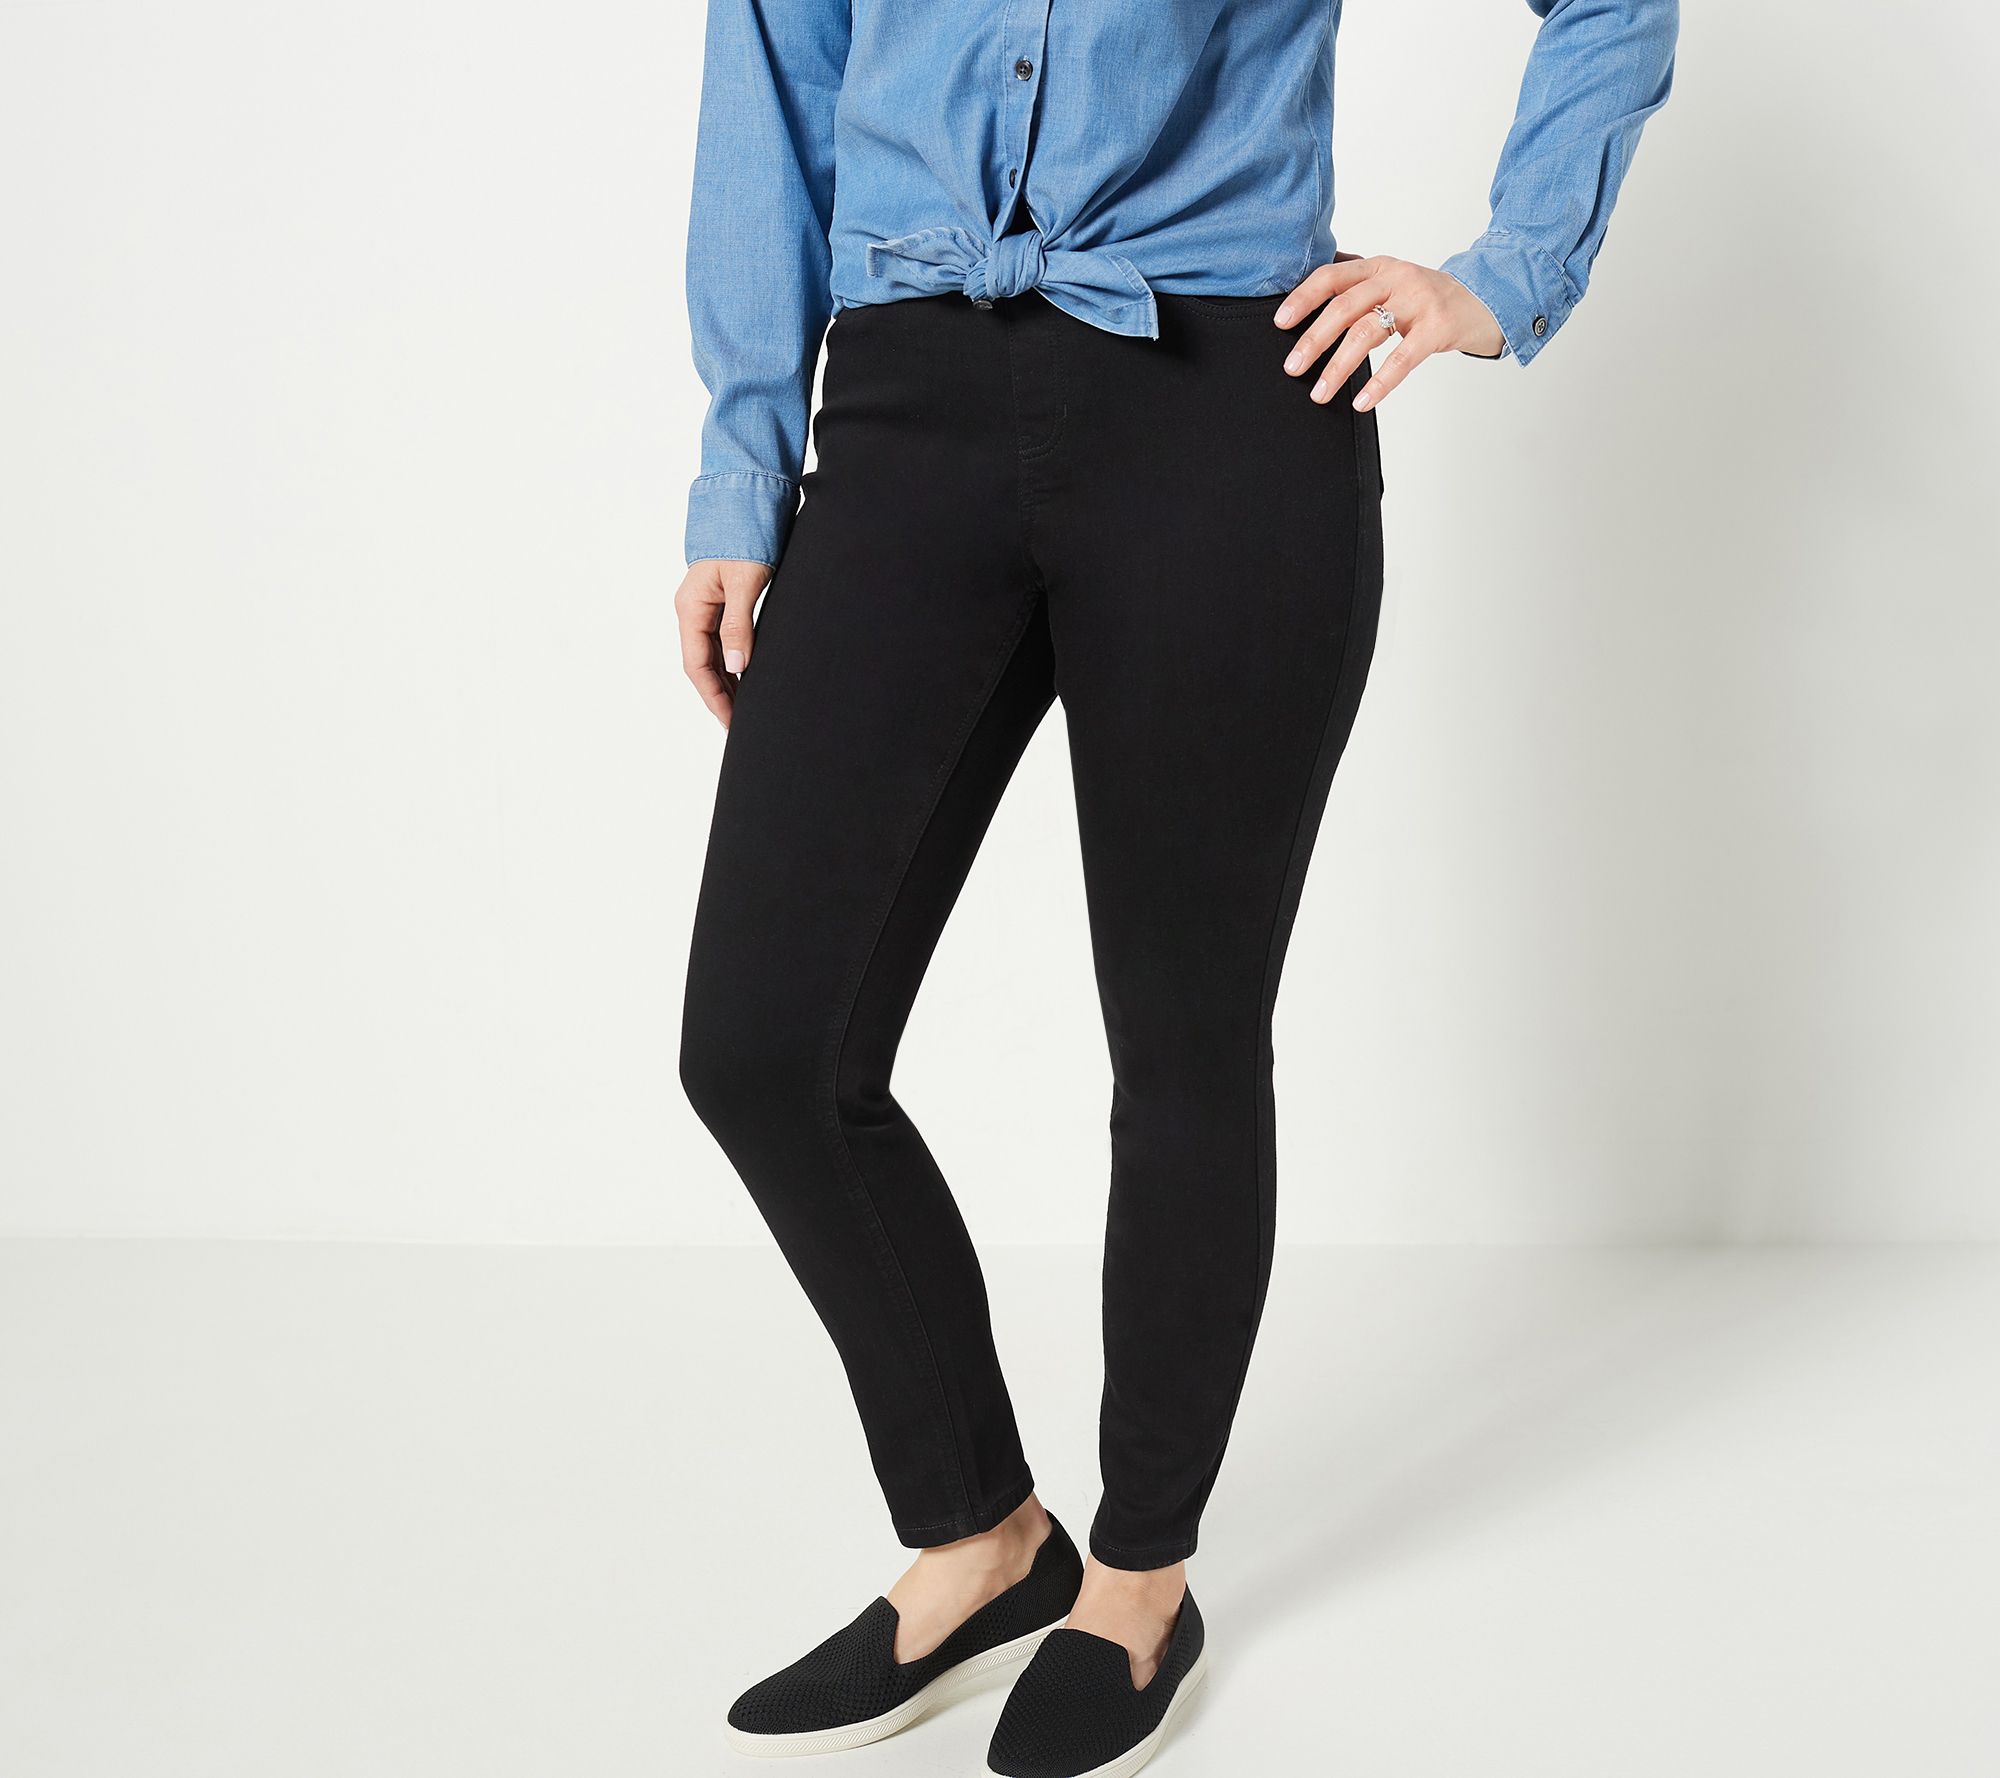 Denim & Co. Cozy Touch Denim Tall Pull-On Jeggings 